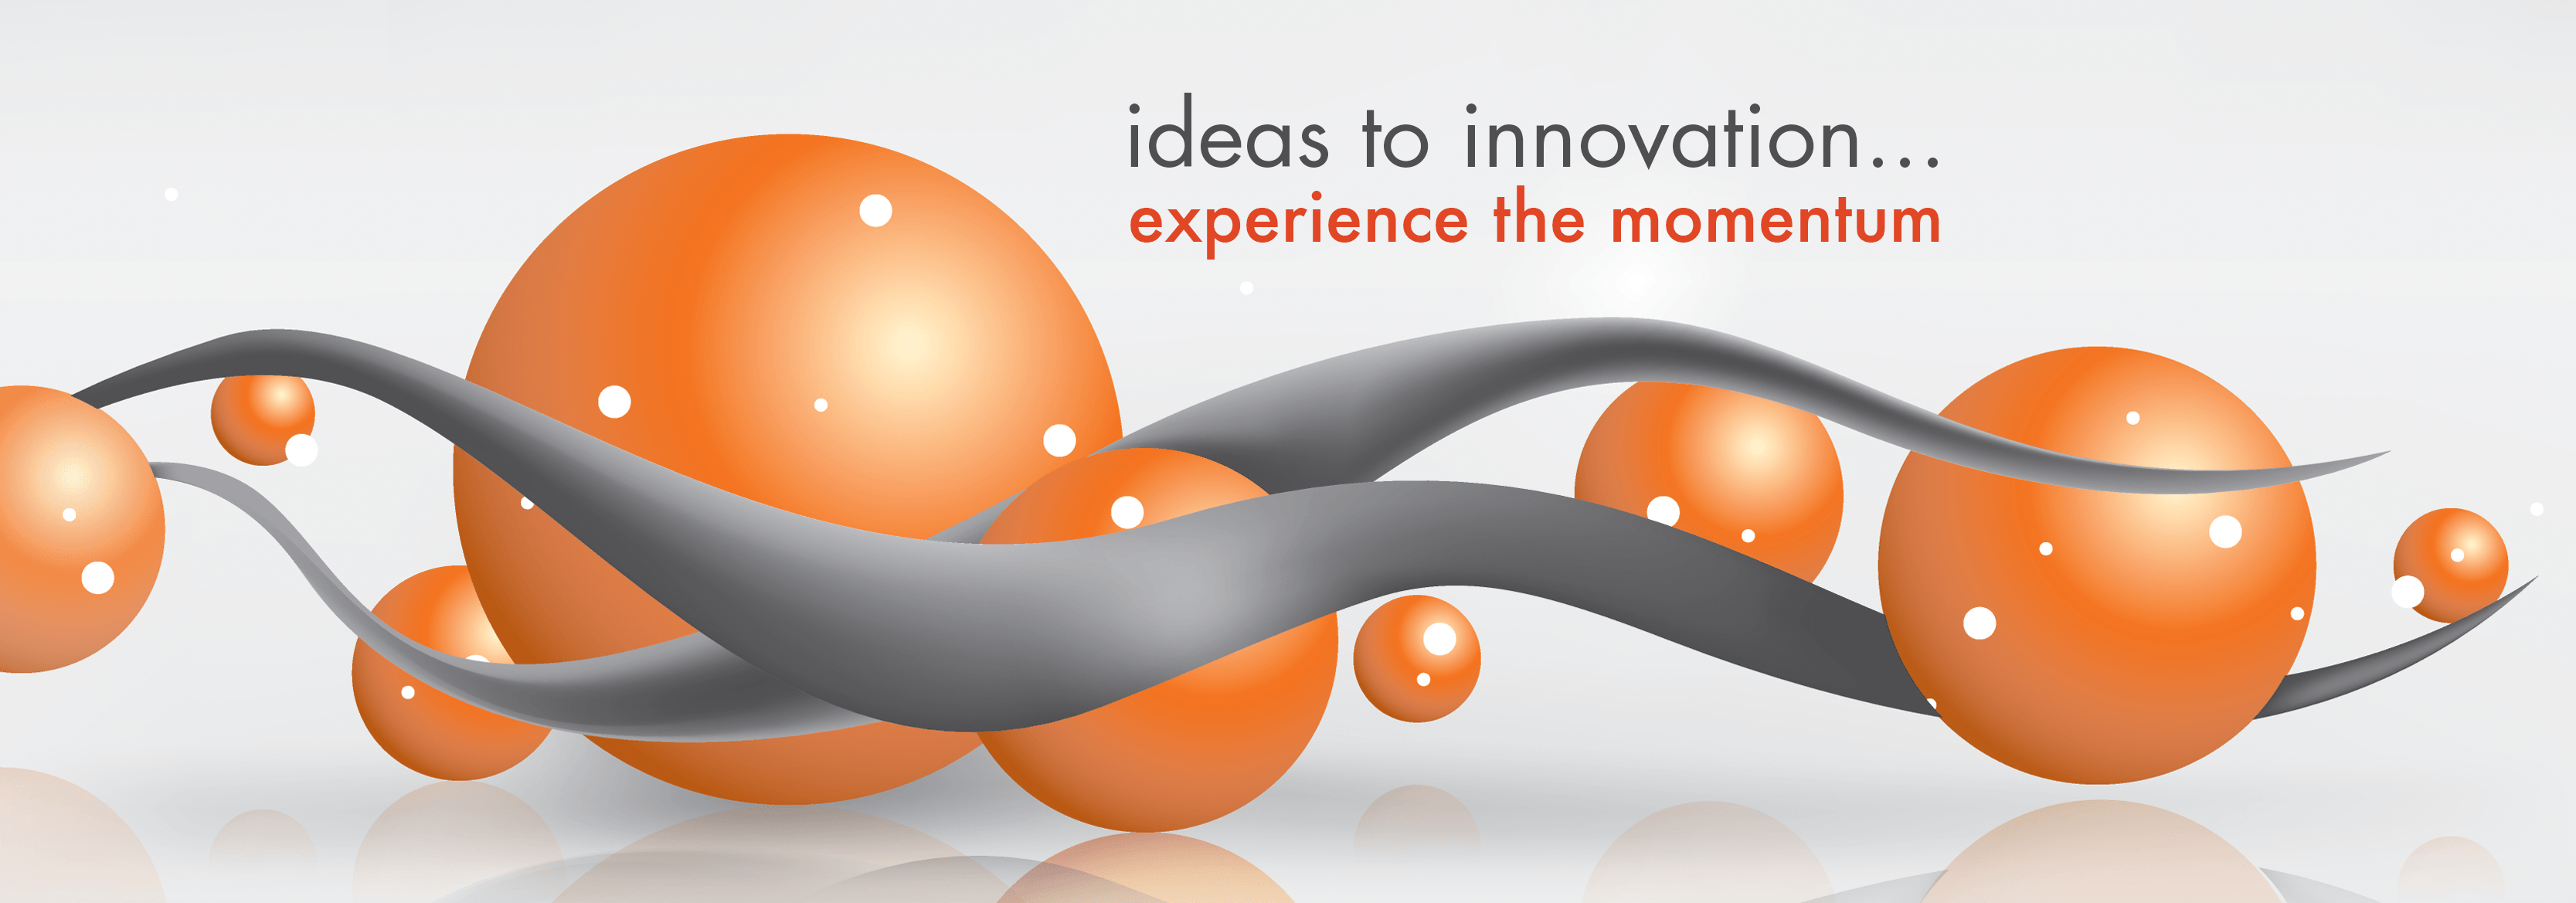 flo innovations cover